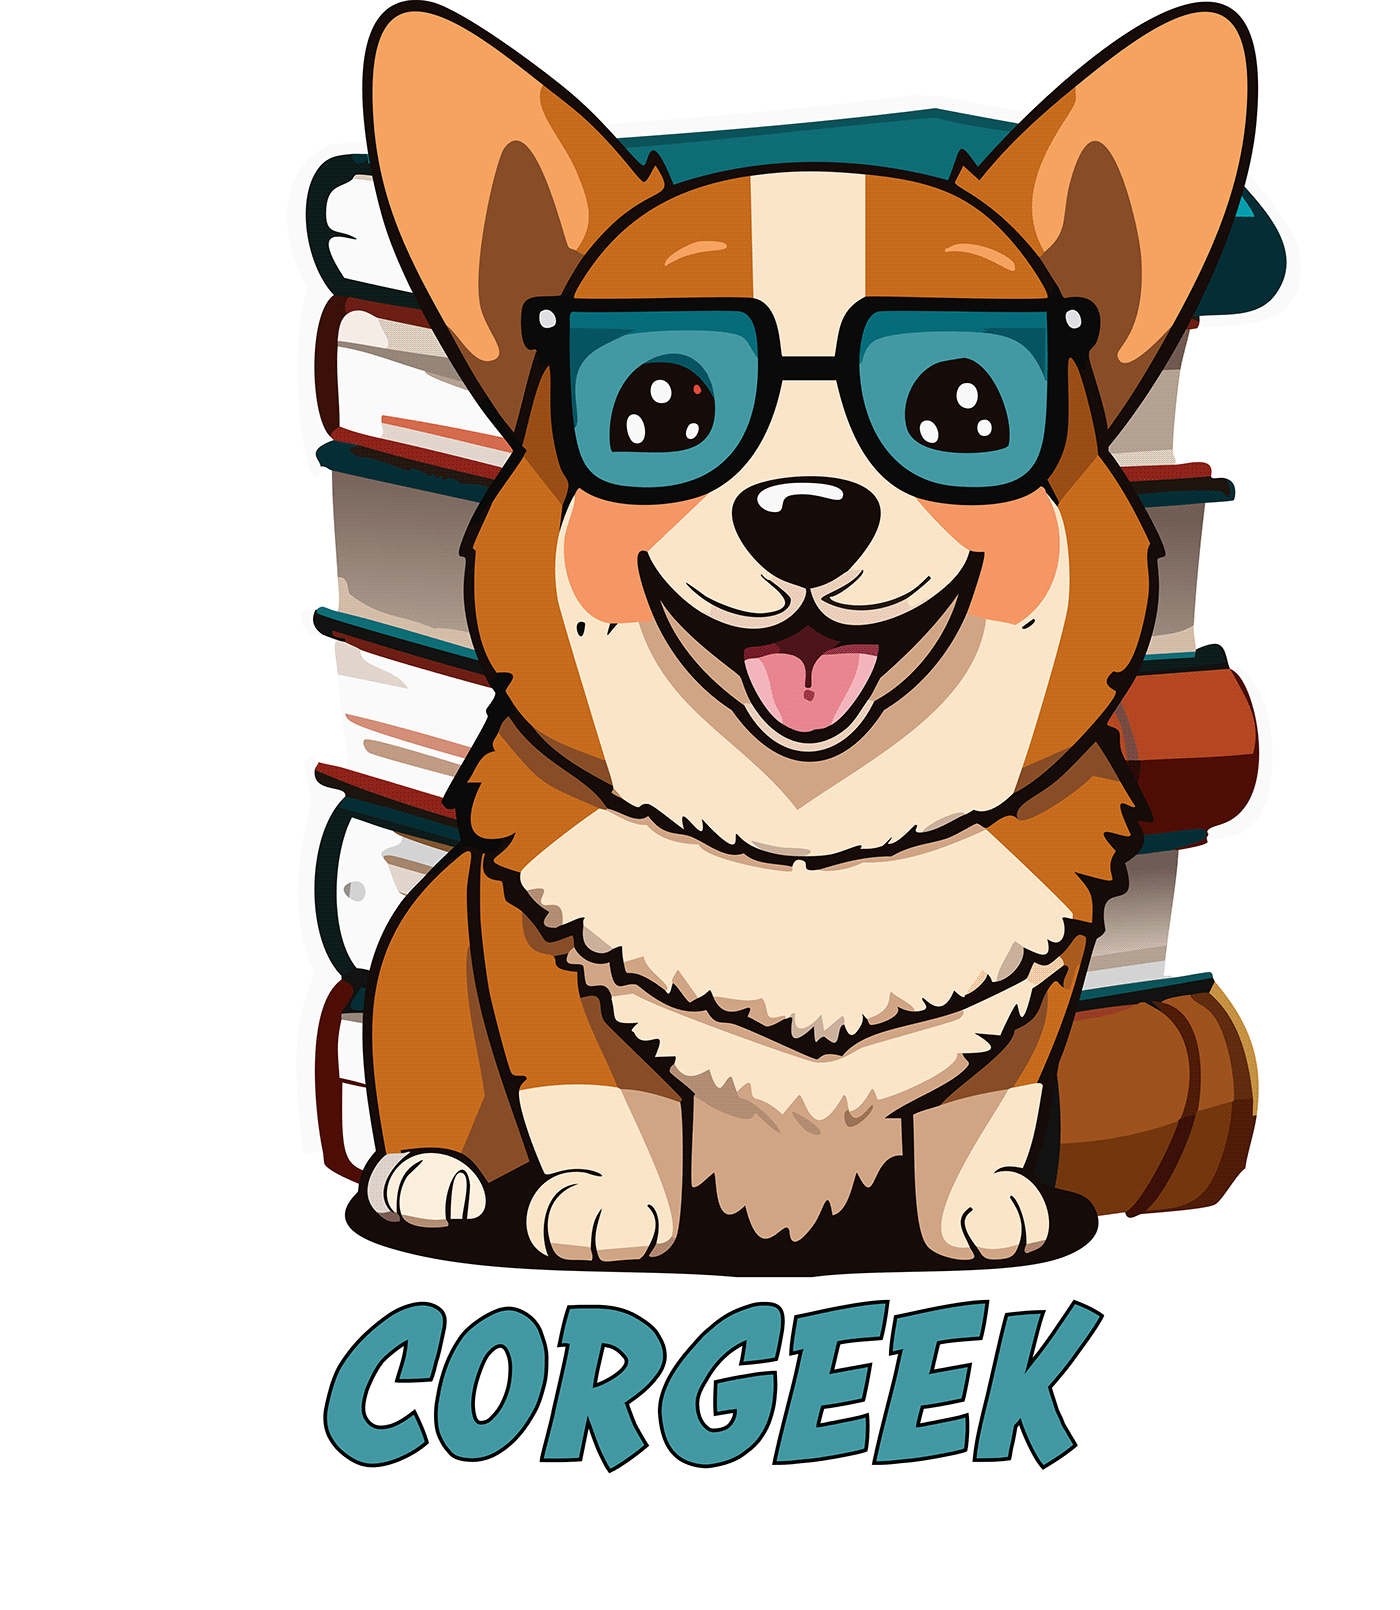 Cute corgi wearing geeky glasses, in front of a stack of books, with the words "Corgeek". 